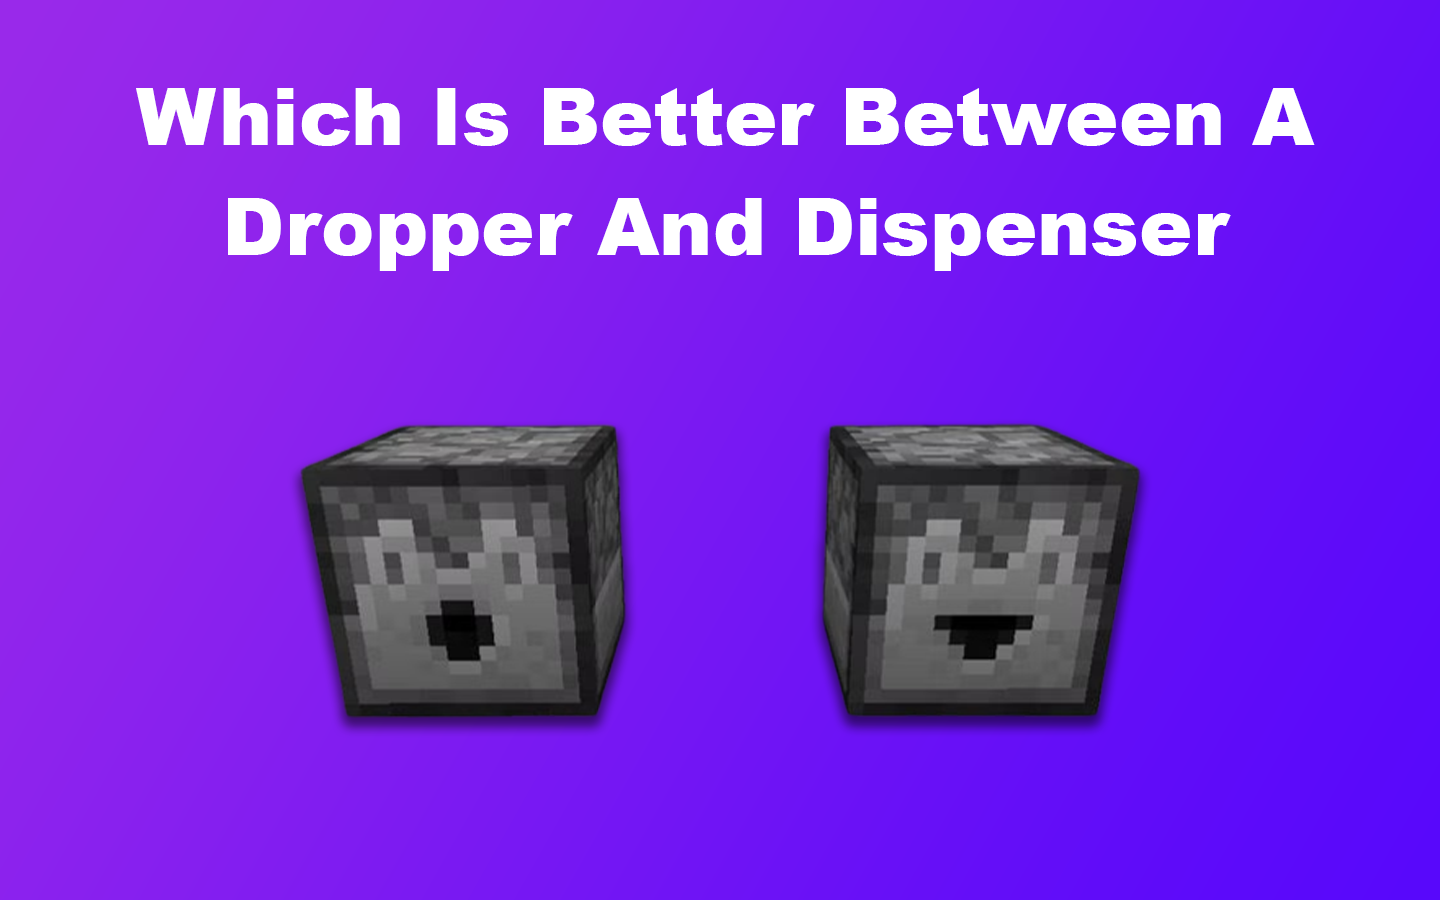 Which Is Better Between a Dropper And a Dispenser